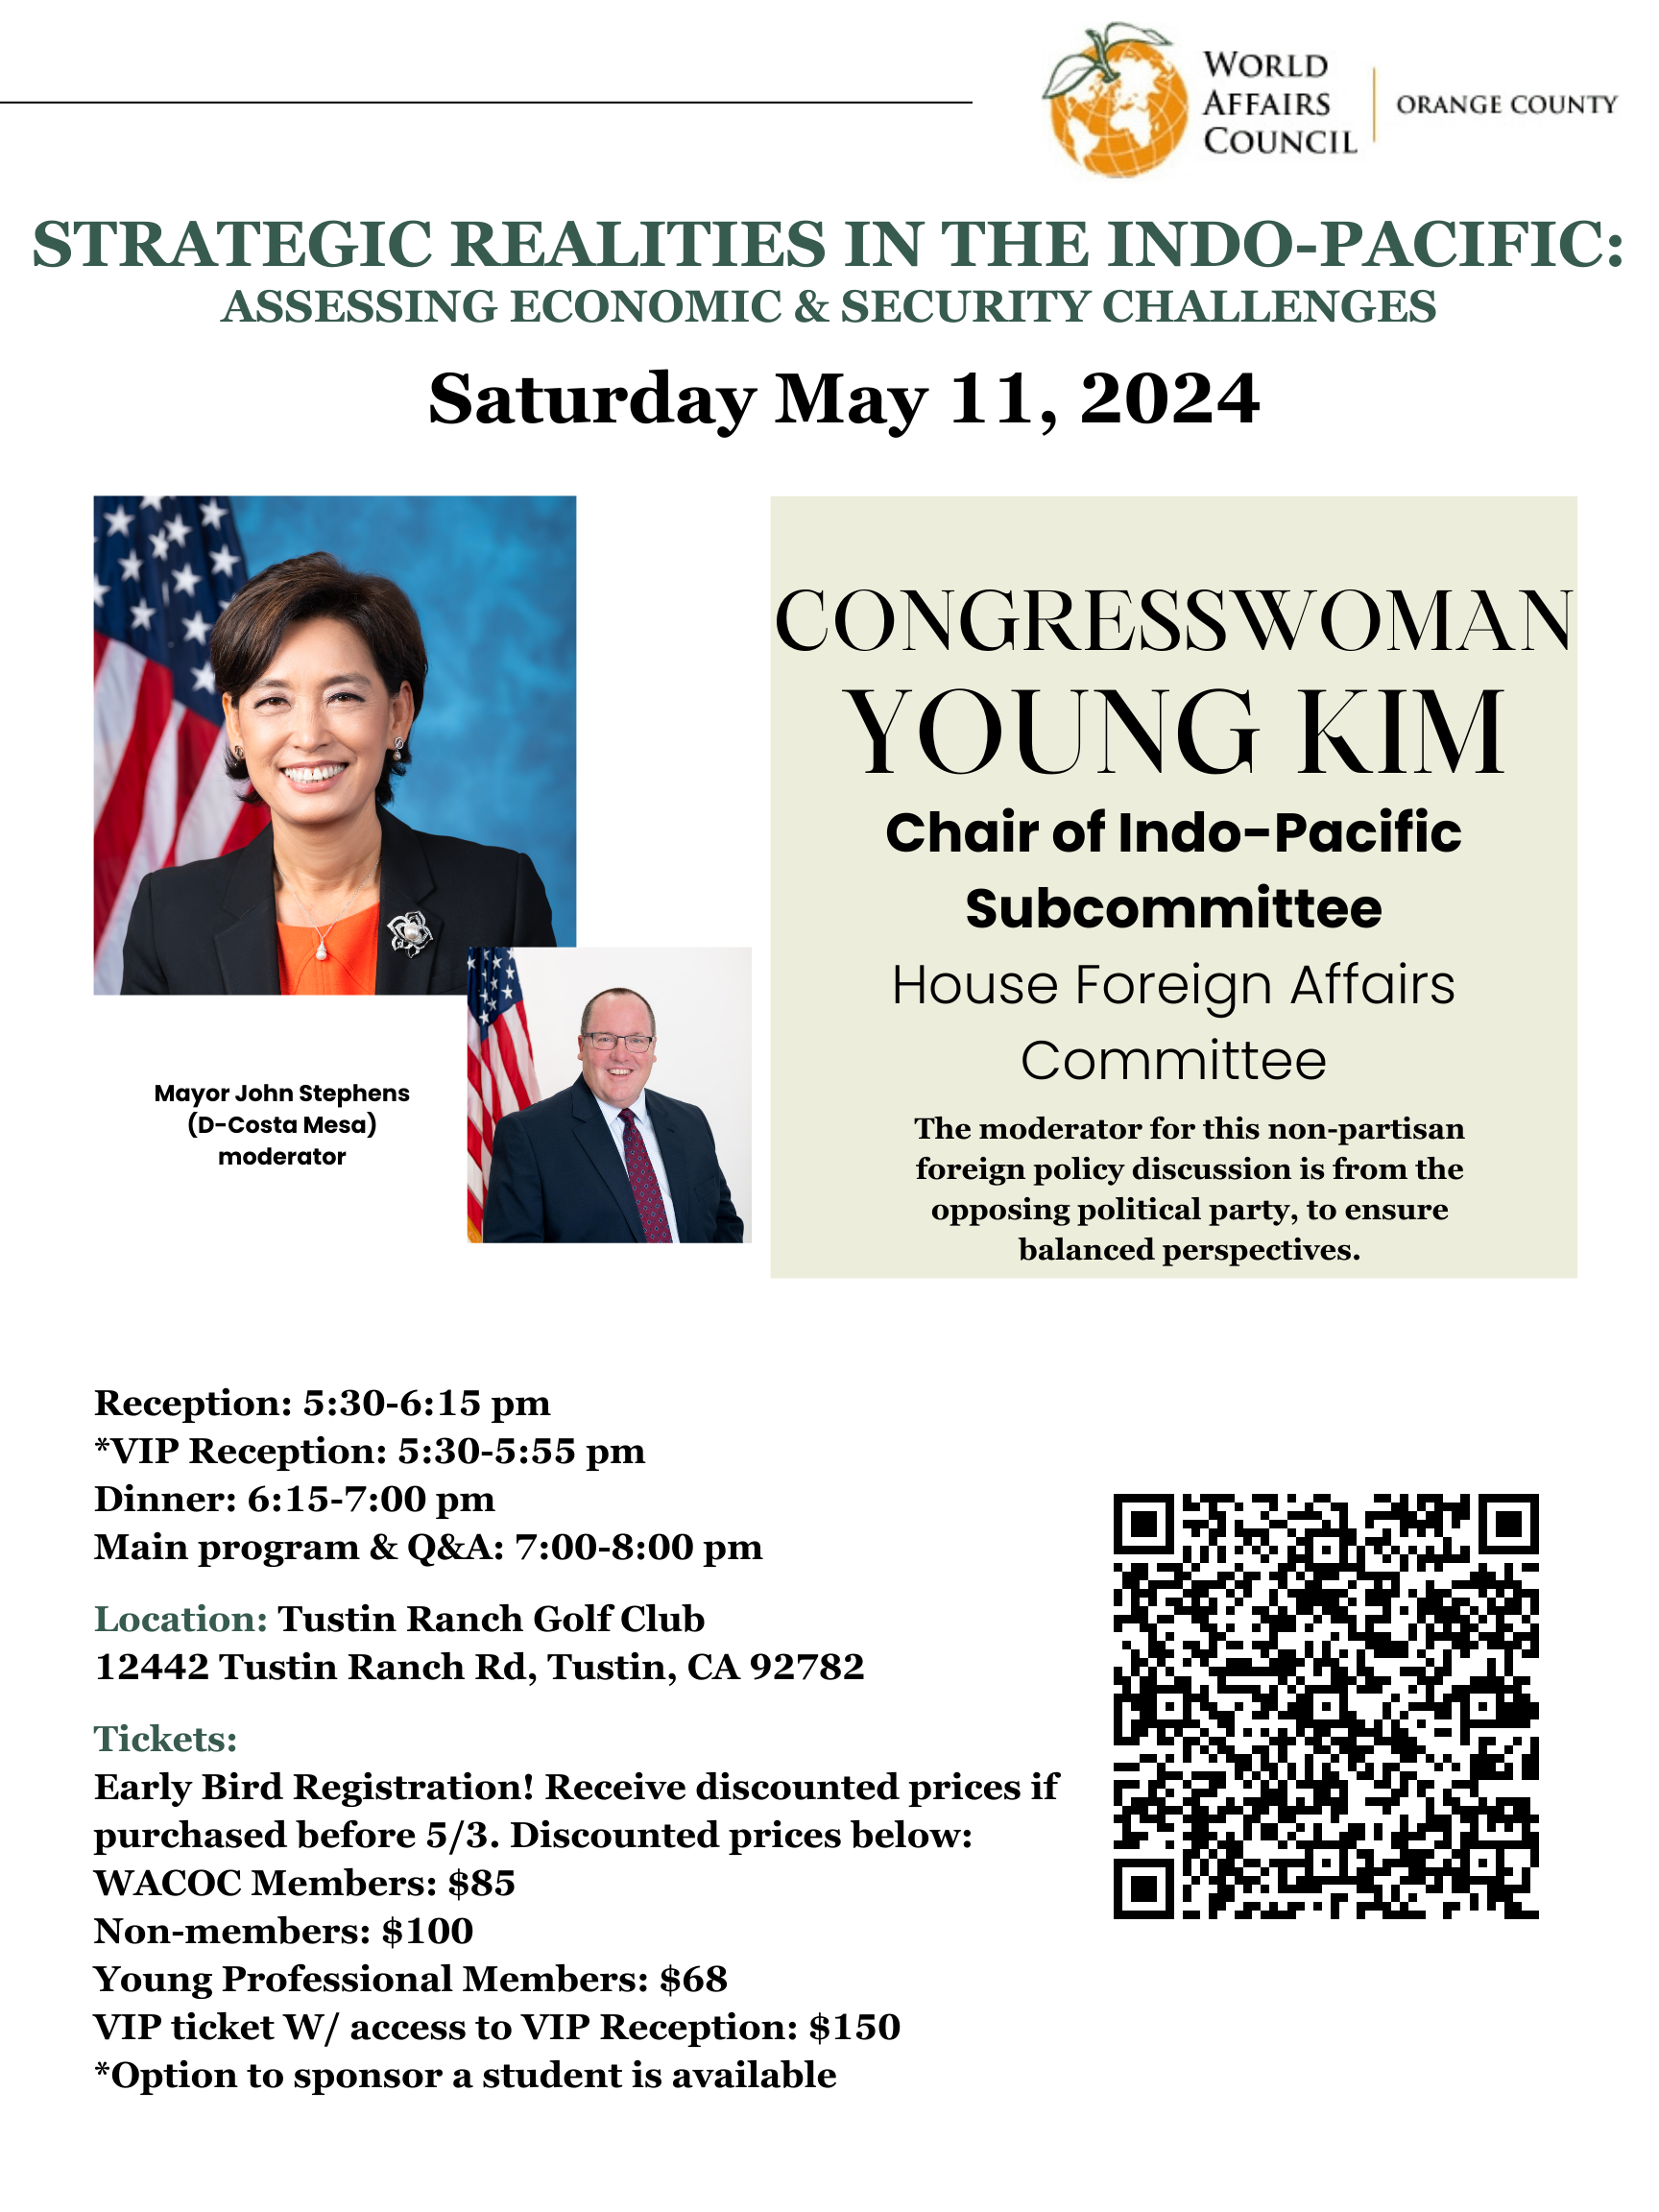 "Strategic Realities in the Indo-Pacific" with Congresswoman Young Kim